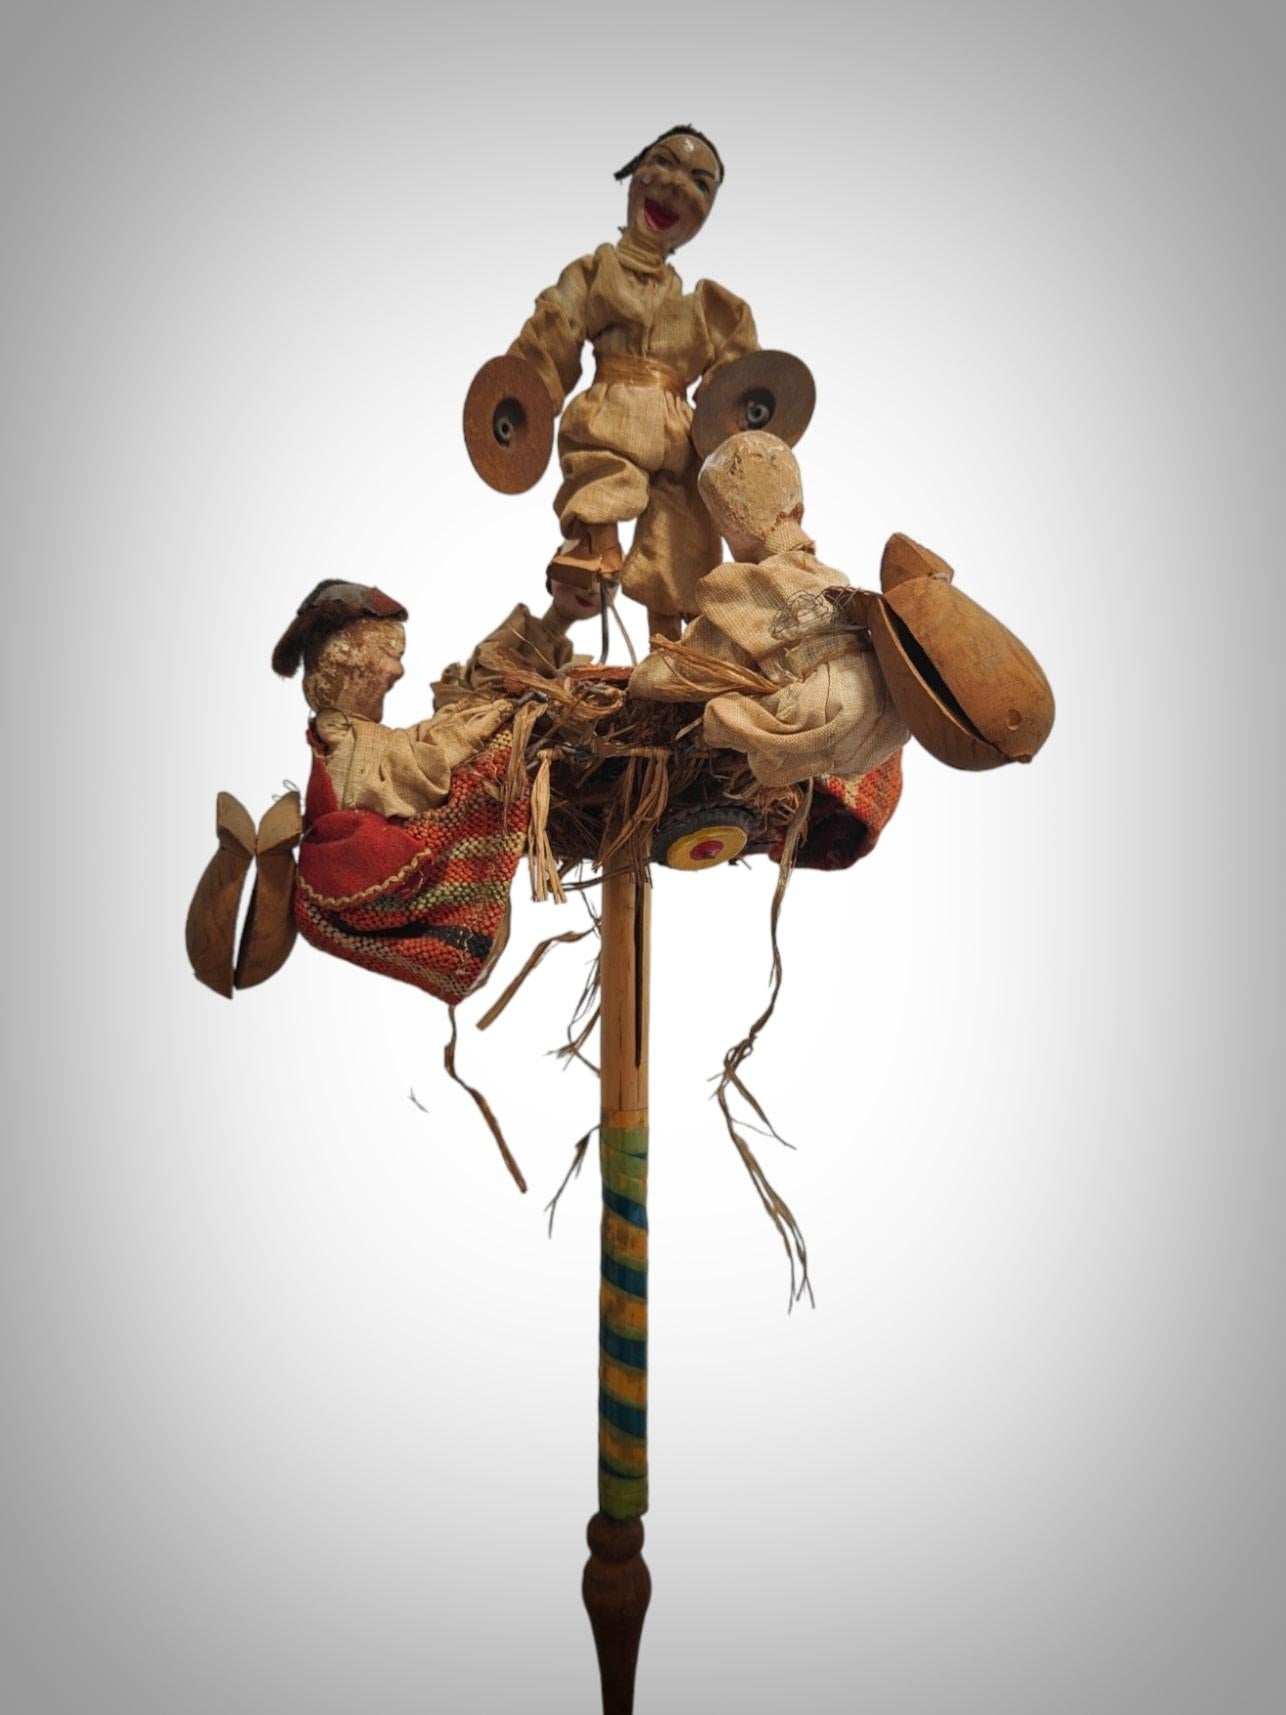 Type: Hand-cranked Automaton Toy
Era: Early 20th Century
Functionality: When the central tube is manually raised and lowered, the characters move.
Dimensions: 55 x 30 x 30 cm
Features and Details:
This intriguing hand-cranked automaton toy from the